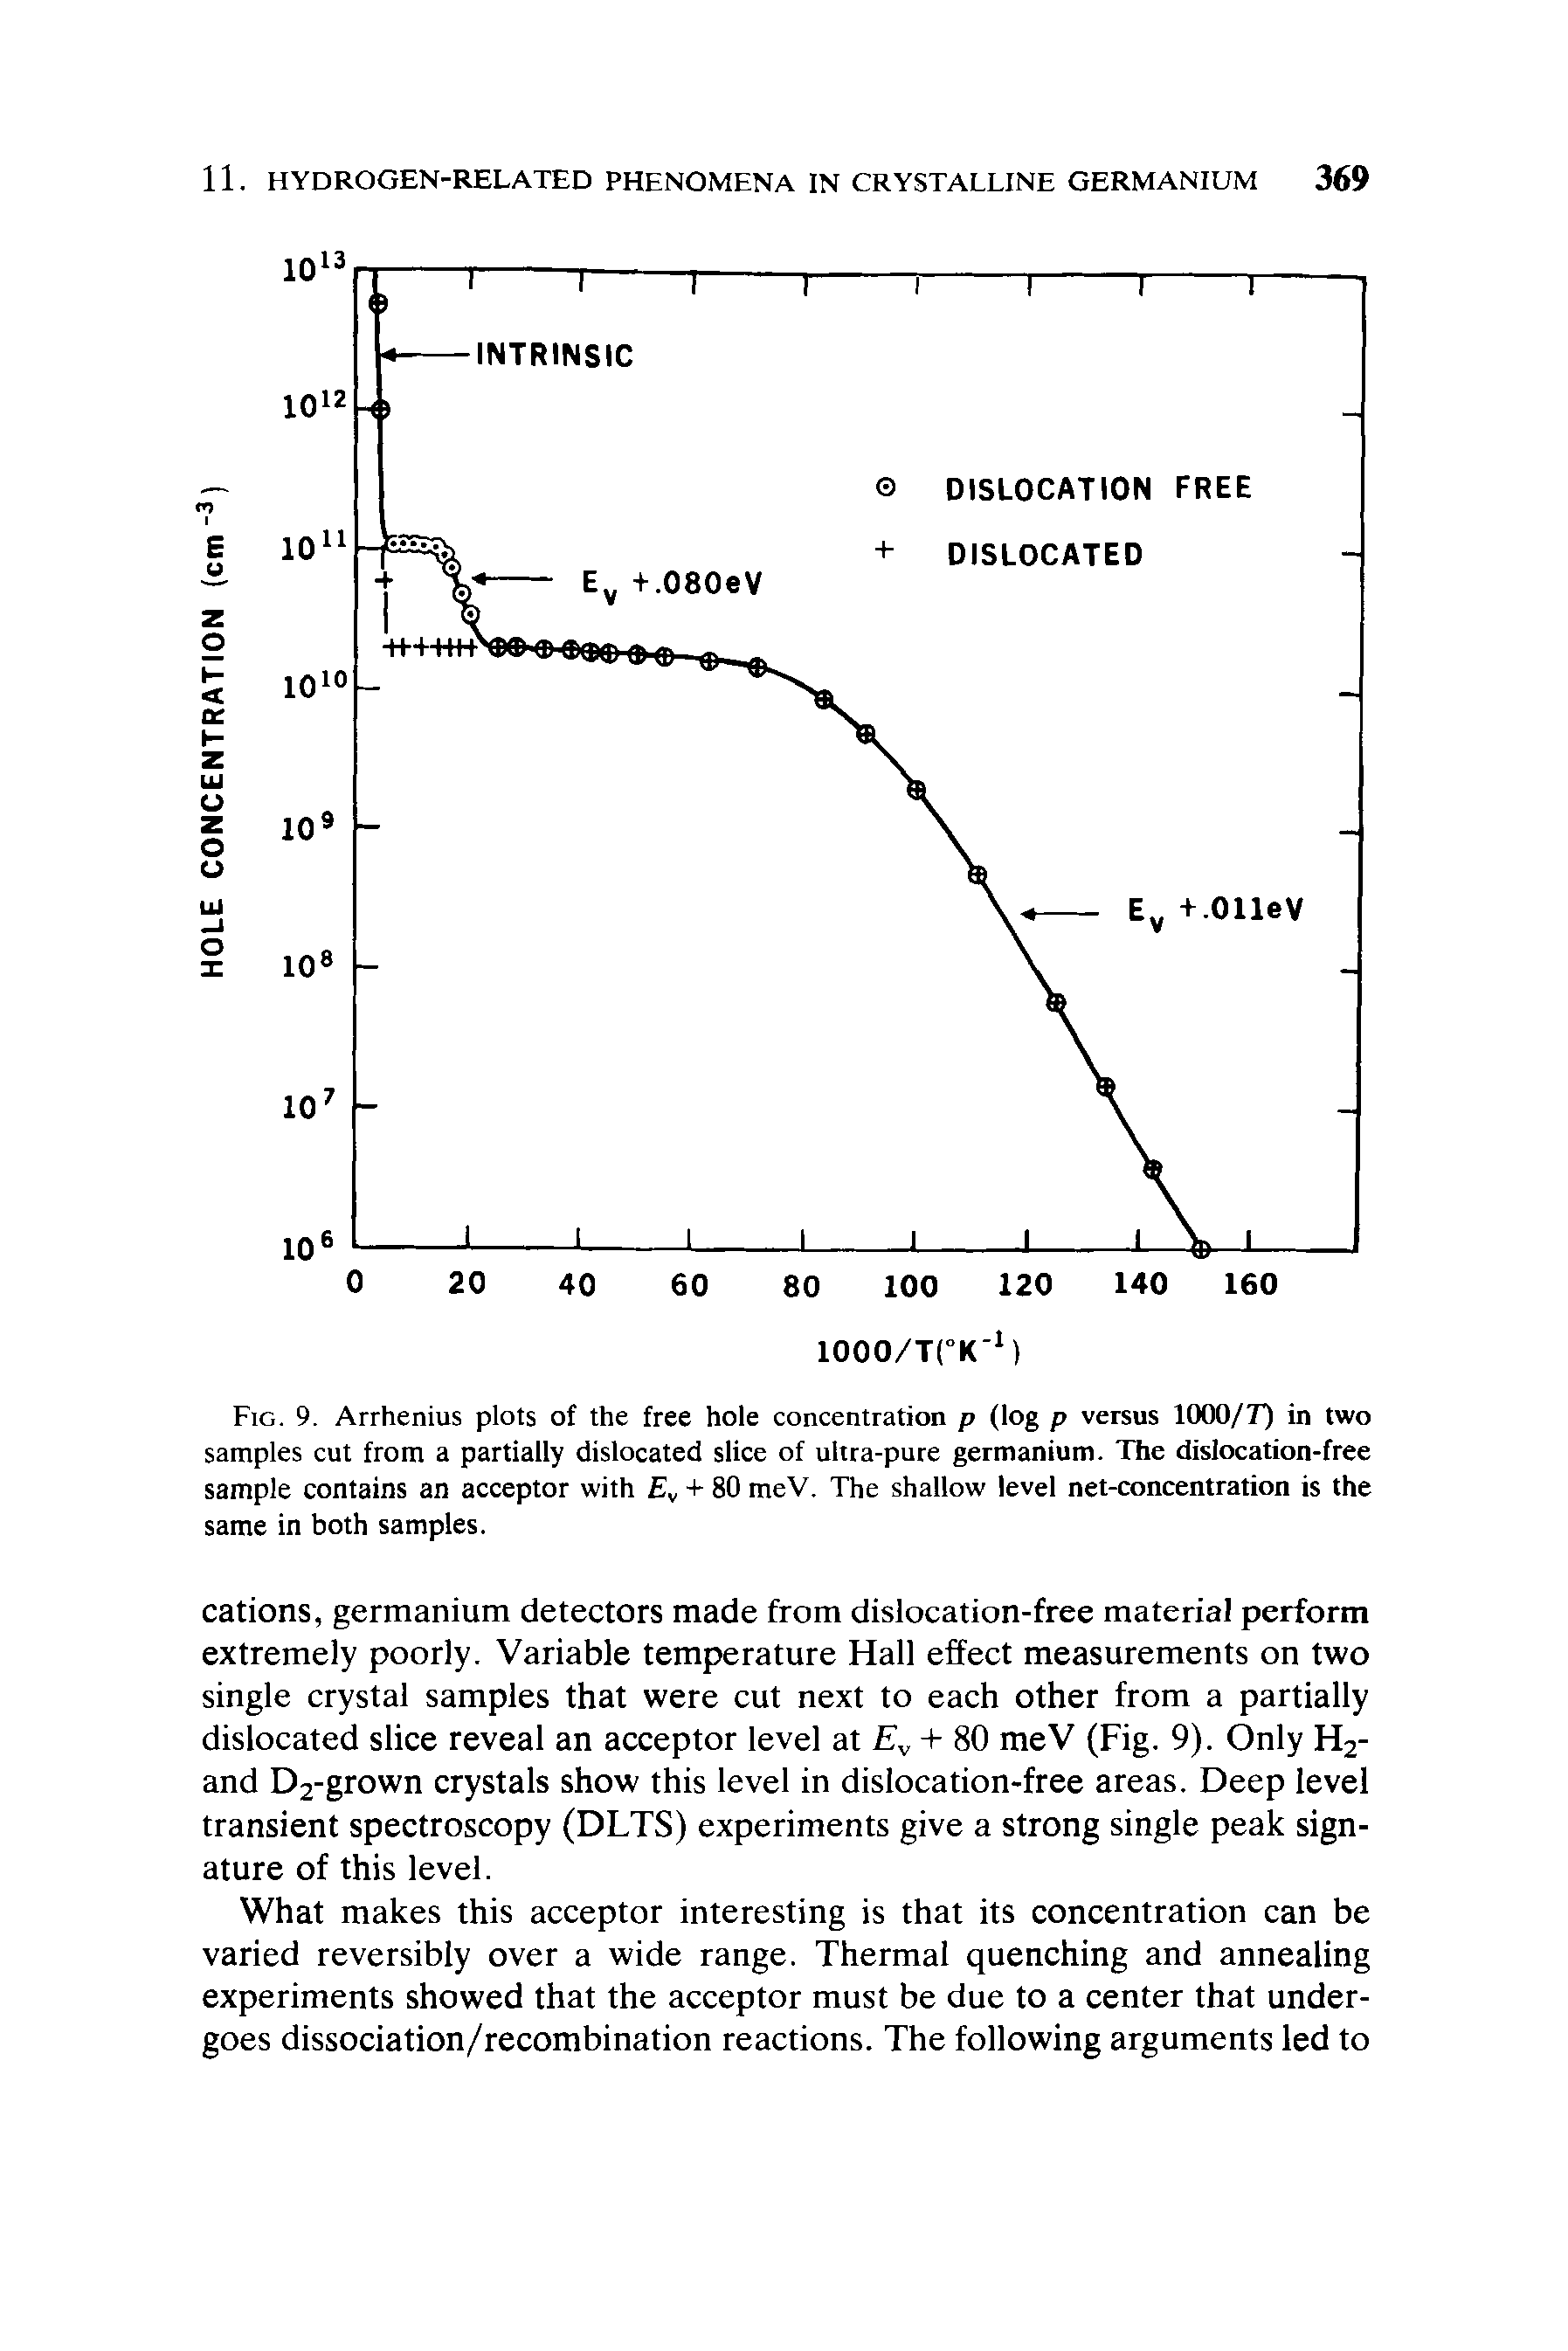 Fig. 9. Arrhenius plots of the free hole concentration p (log p versus 1000/T) in two samples cut from a partially dislocated slice of ultra-pure germanium. The dislocation-free sample contains an acceptor with Ev + 80 meV. The shallow level net-concentration is the same in both samples.